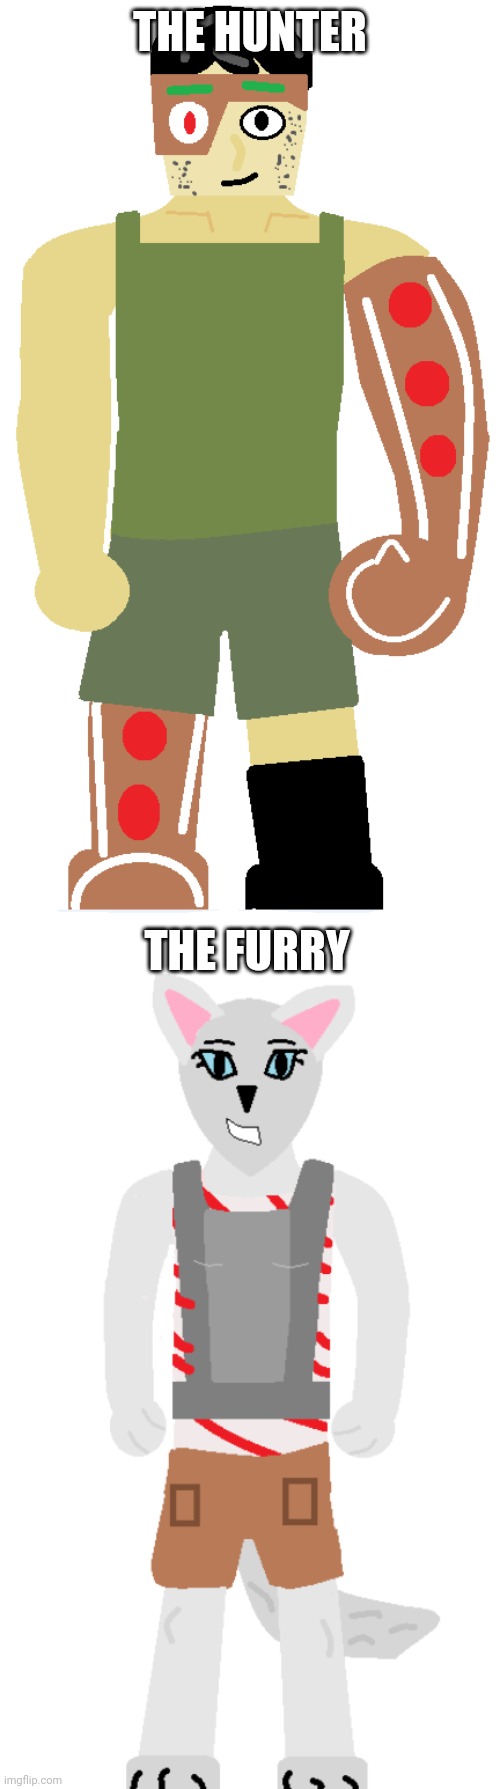 THE HUNTER THE FURRY | image tagged in gingerbread man,candystripe | made w/ Imgflip meme maker